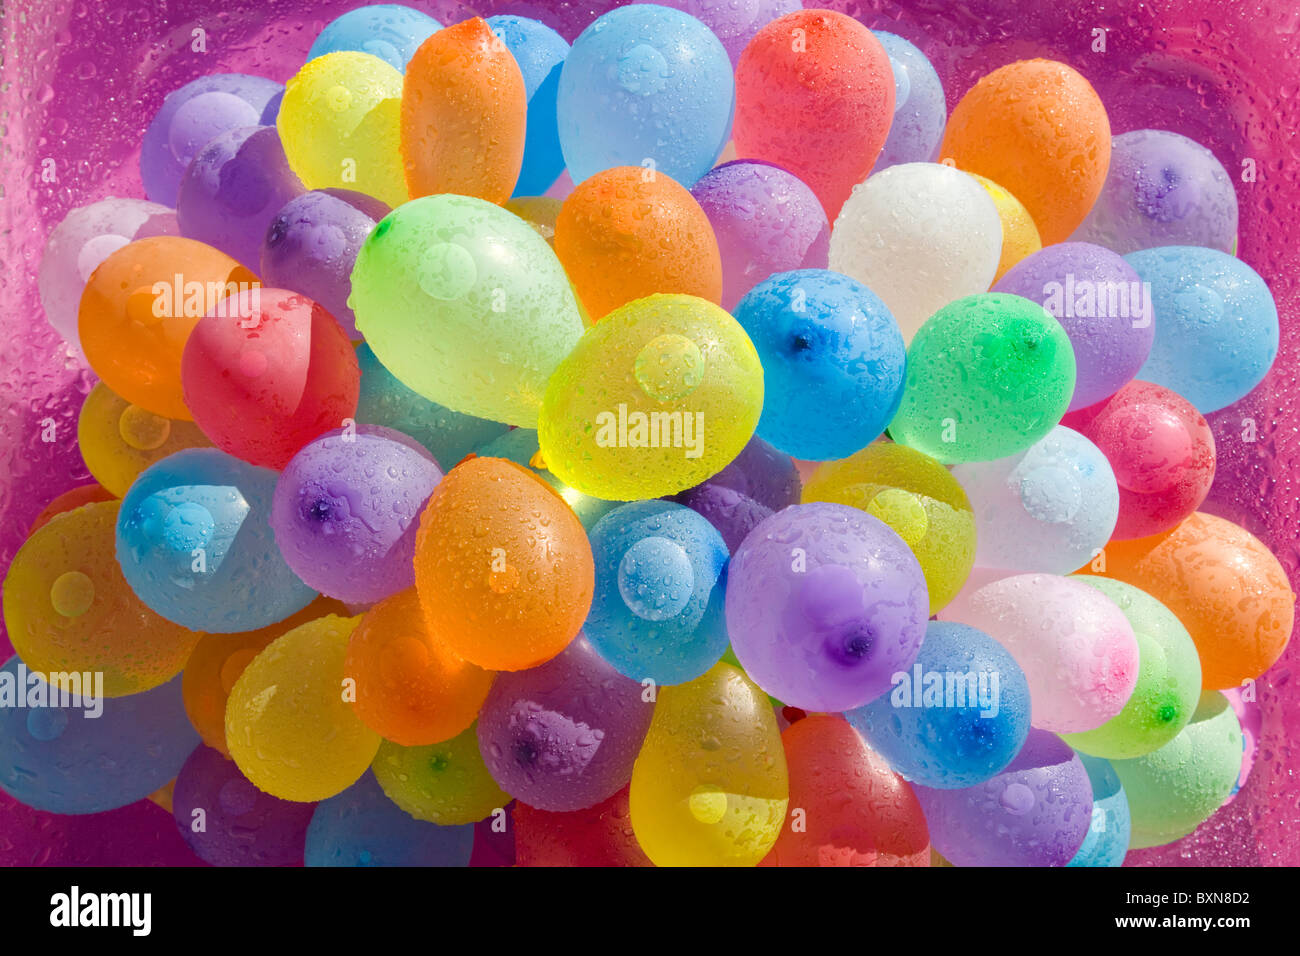 Multicolored moistened water filled balloons viewed from above Stock Photo